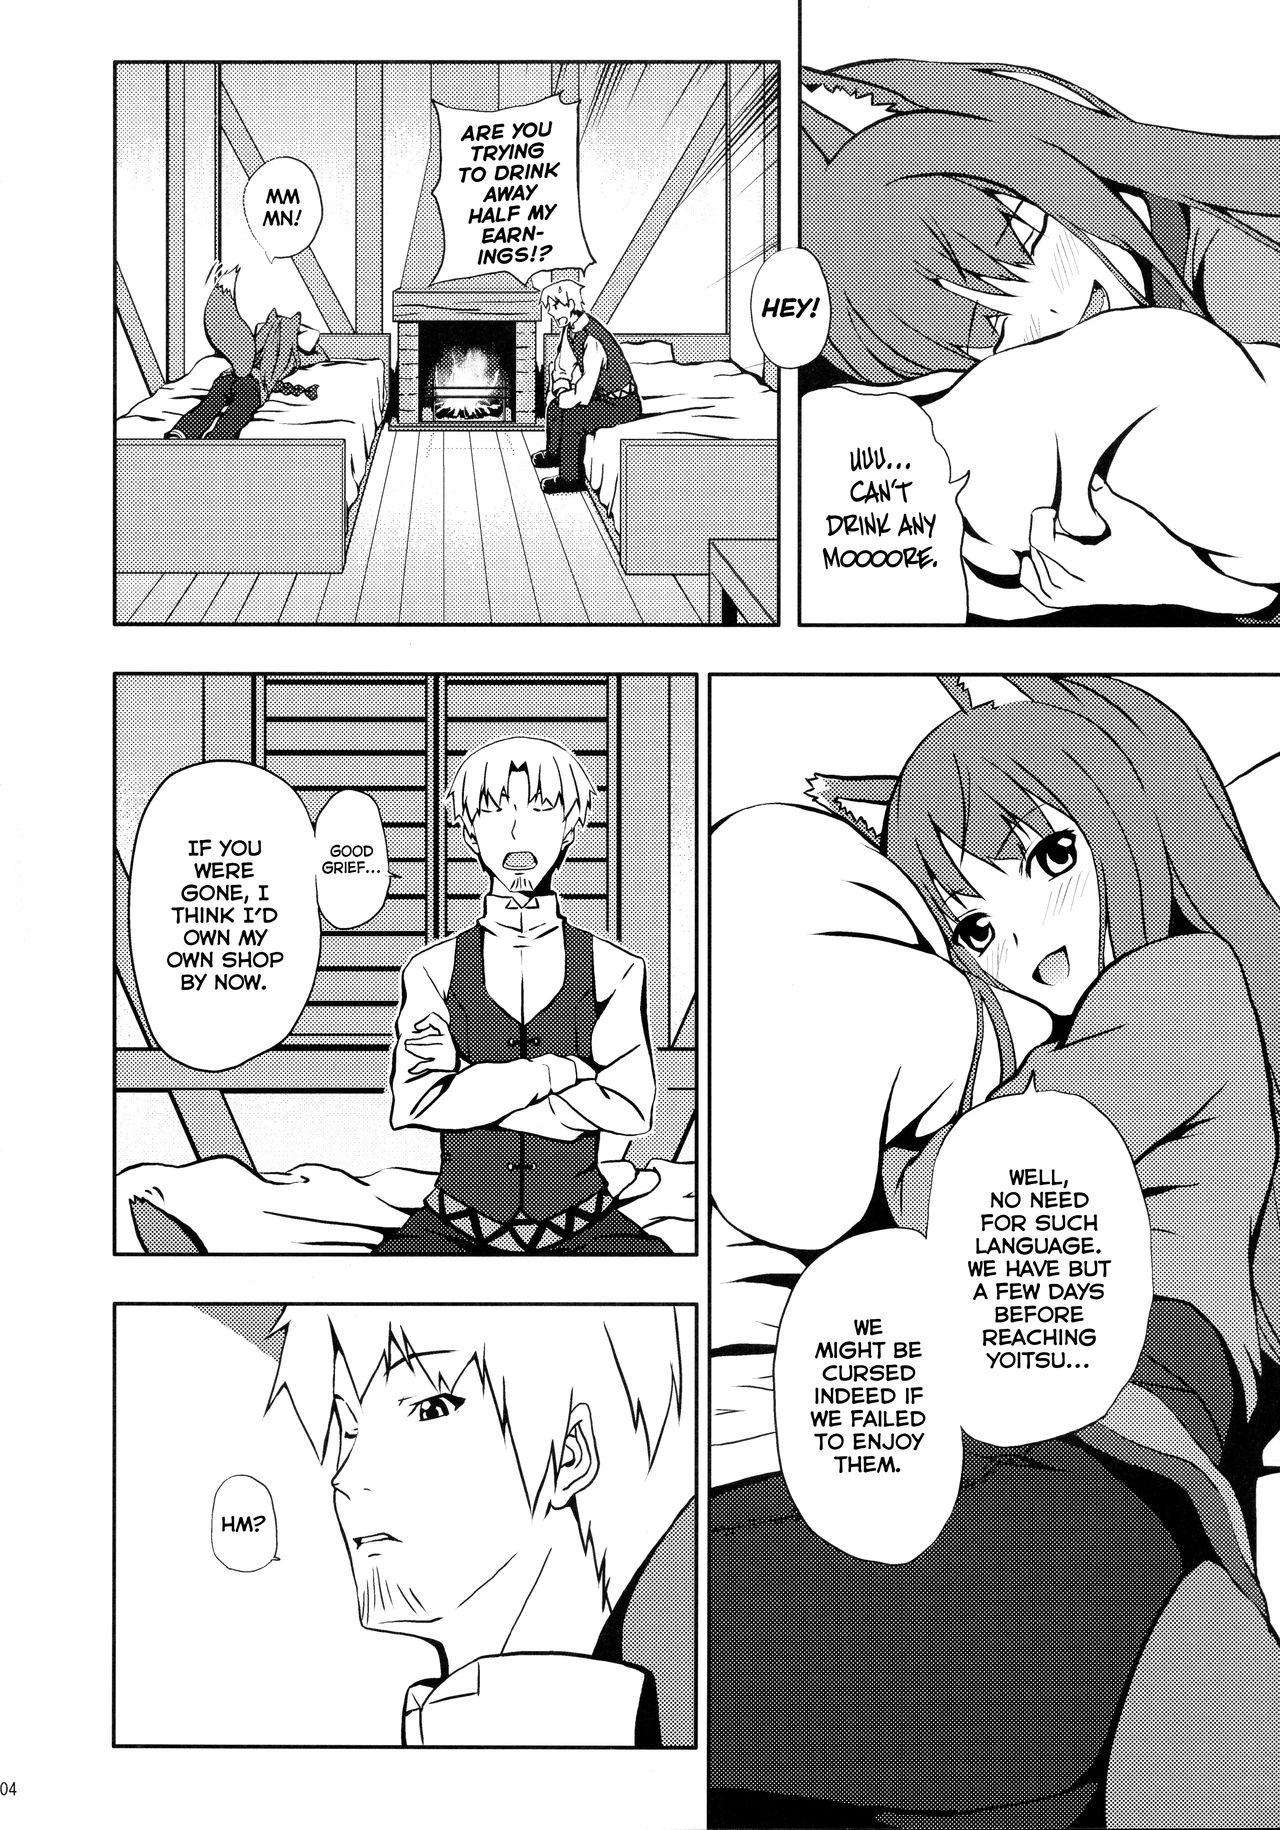 Asia Bitter Apple - Spice and wolf Nuru - Page 4